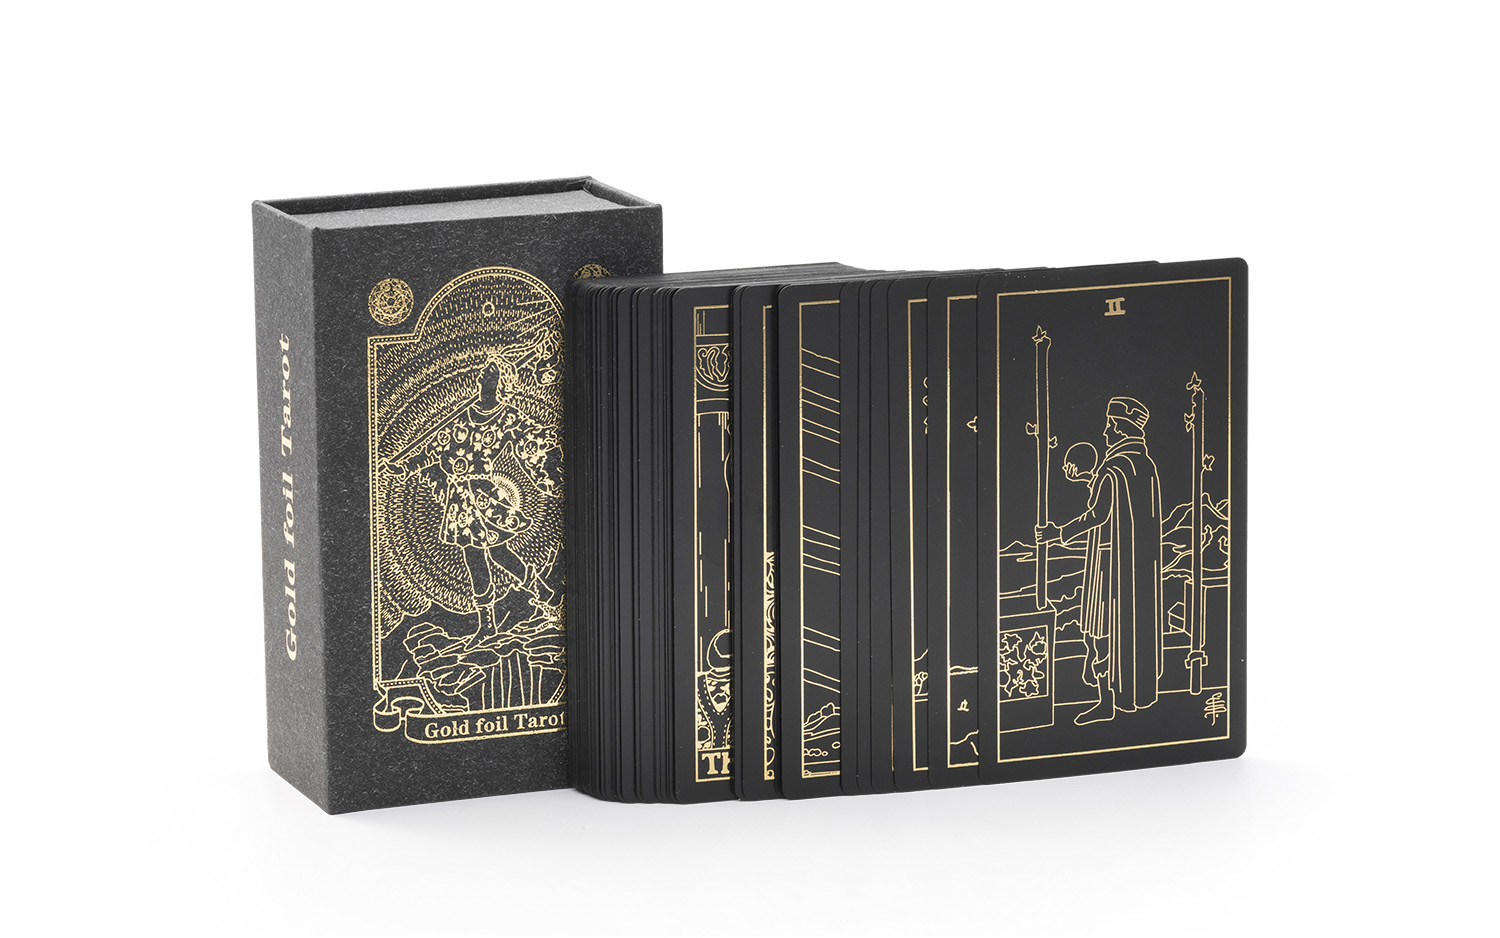 Unique Tarot Decks for Beginners with Guidebook, Water Proof Gilded Black 78 Original Tarot Cards Fortune Telling Cards